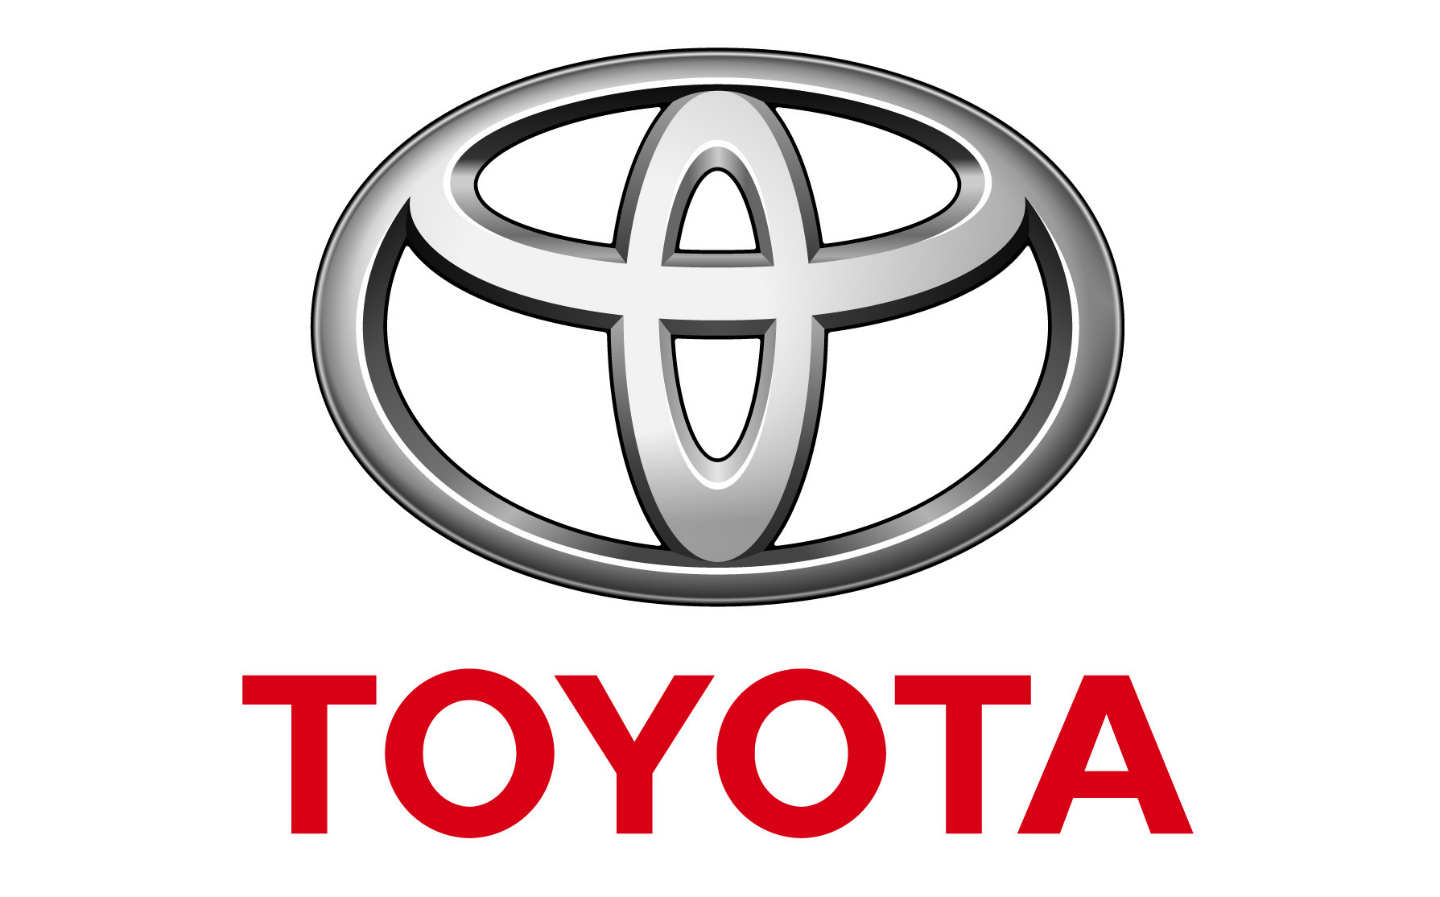 Sunday Times Motor Awards 2019 Best Car Manufacturer of the Year. Toyota